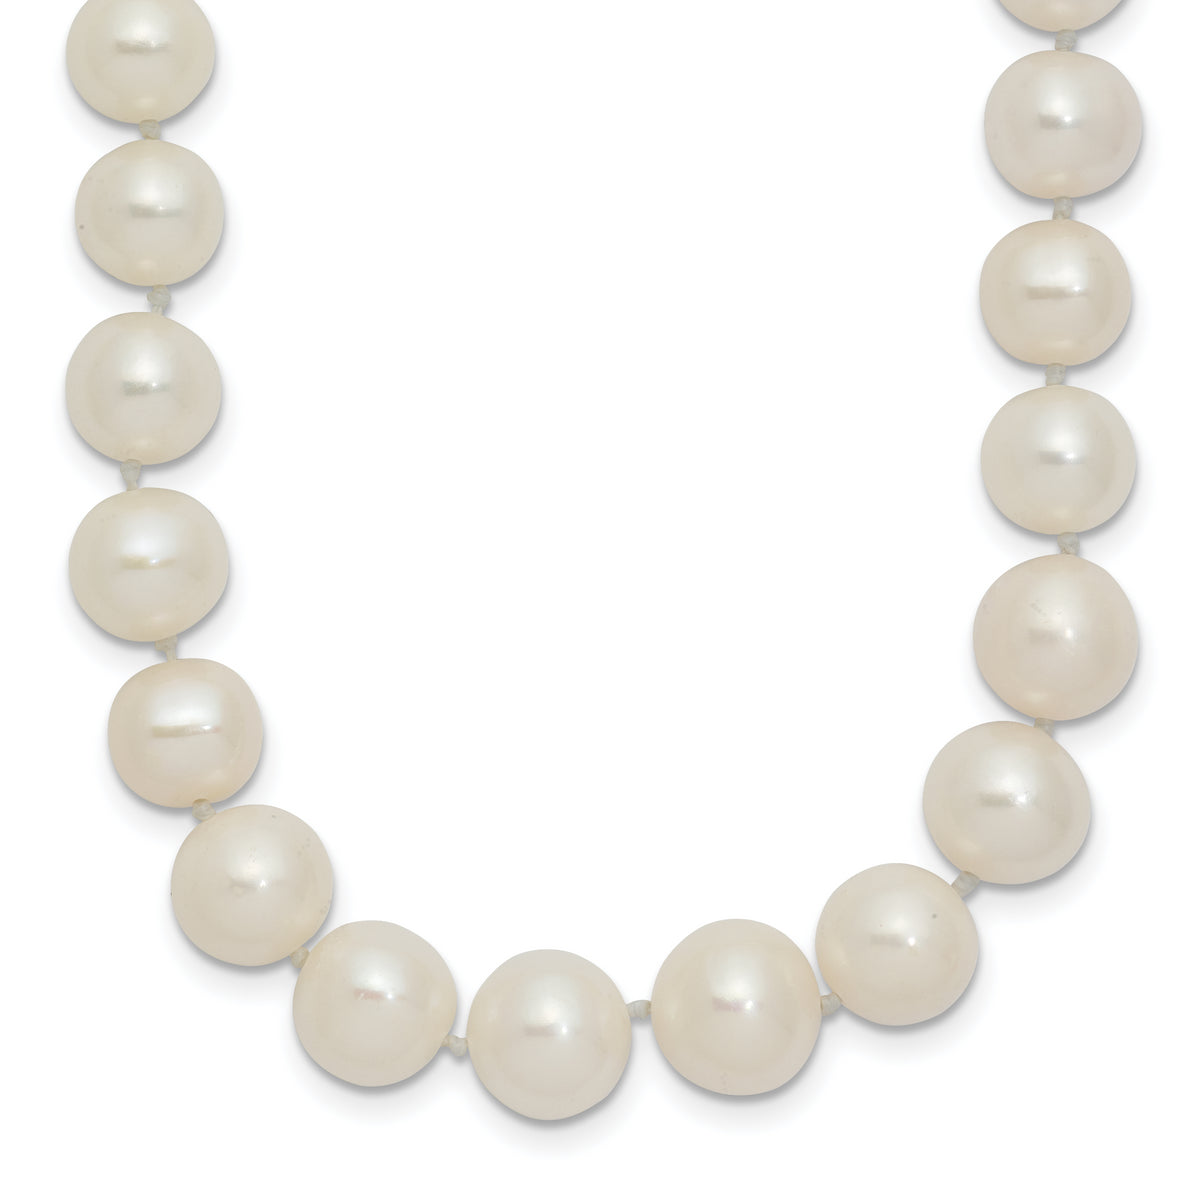 14k 7.5-9mm White Freshwater Cultured Pearl Graduated Necklace